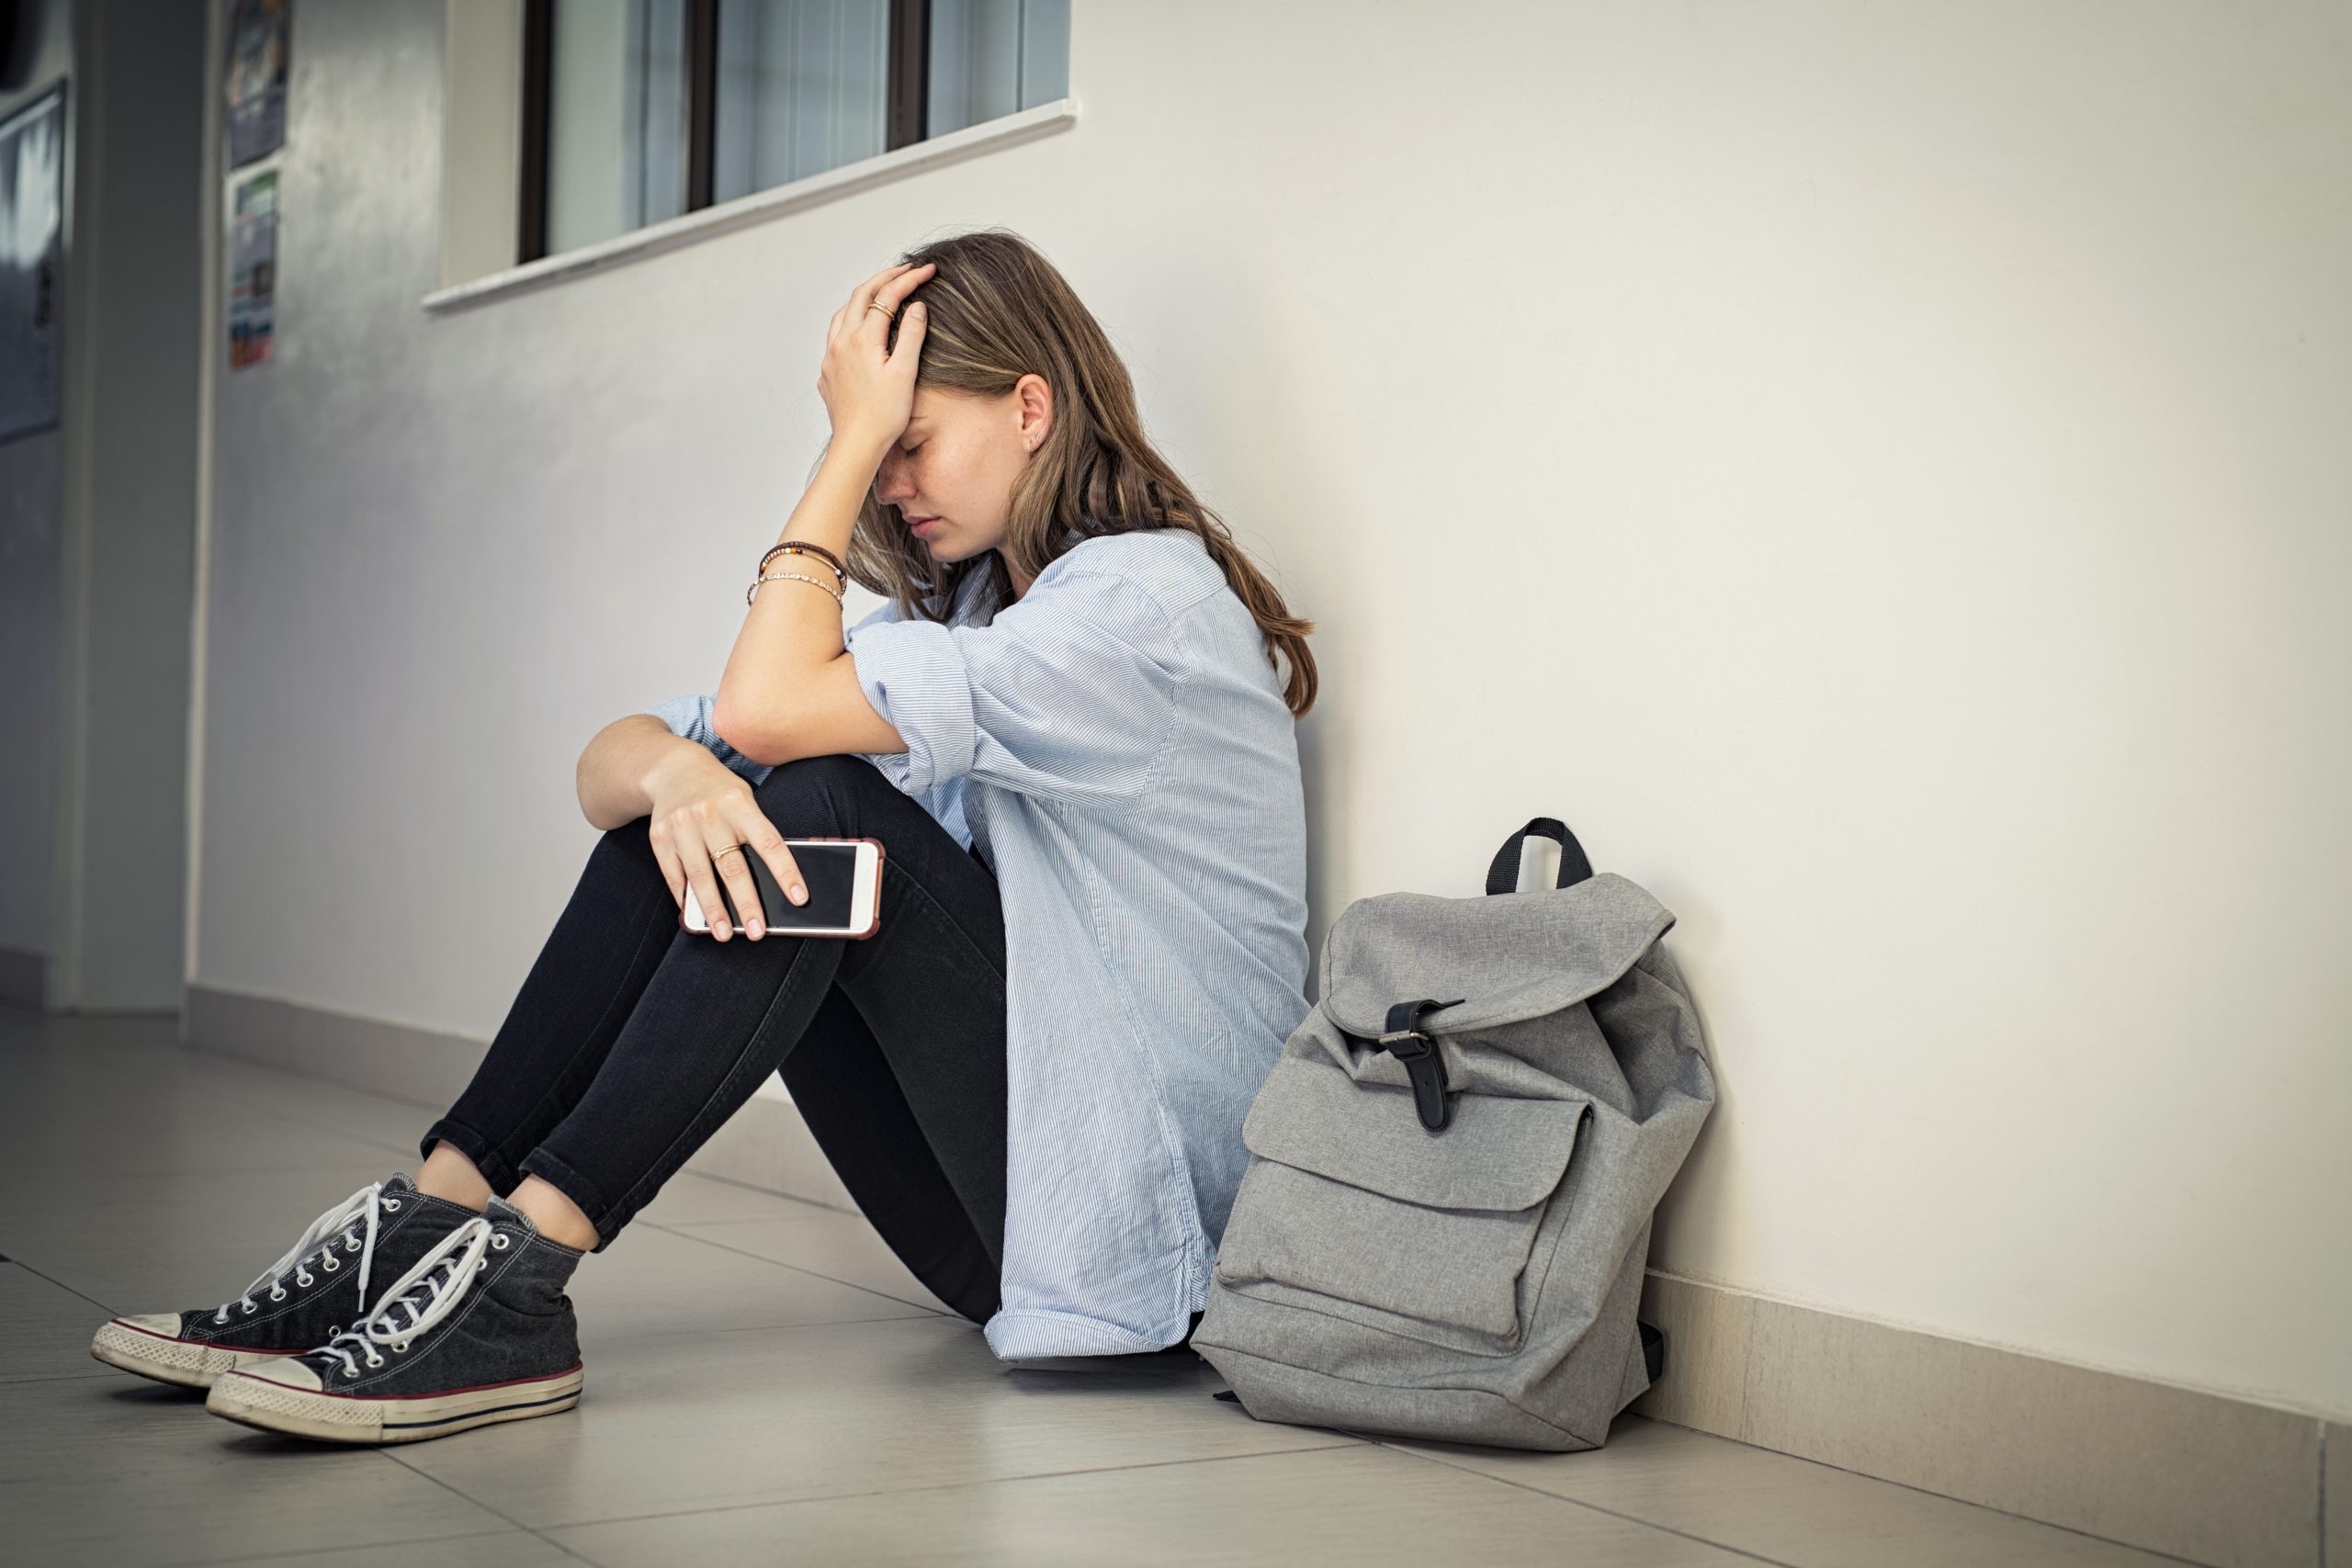 How to Get Help for Teenage Depression